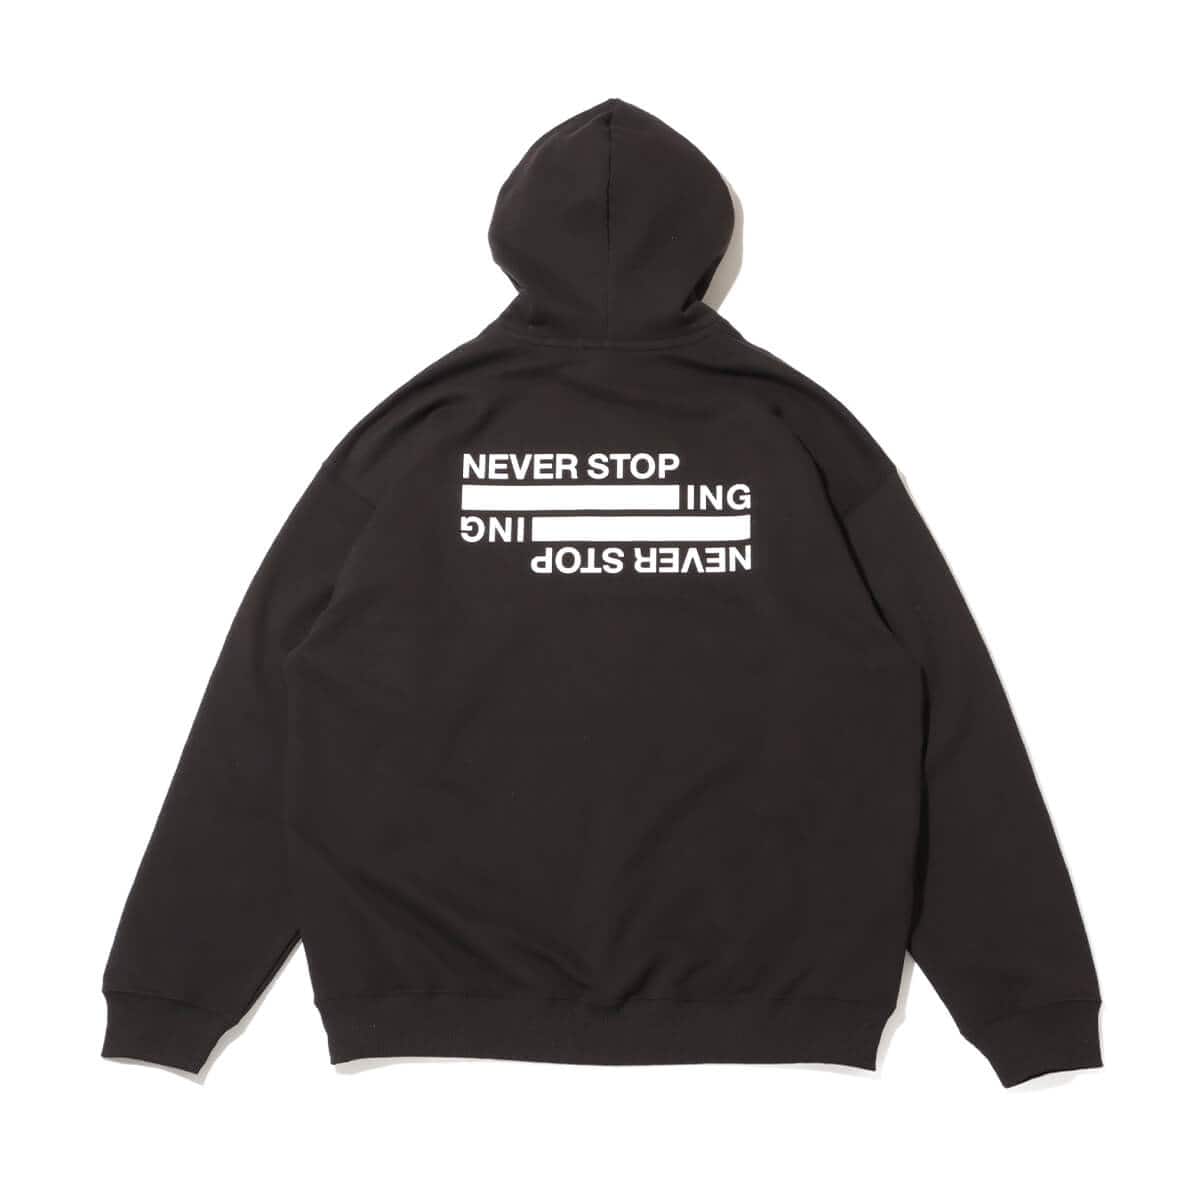 THE NORTH FACE NEVER STOP ING Hoodie ブラック